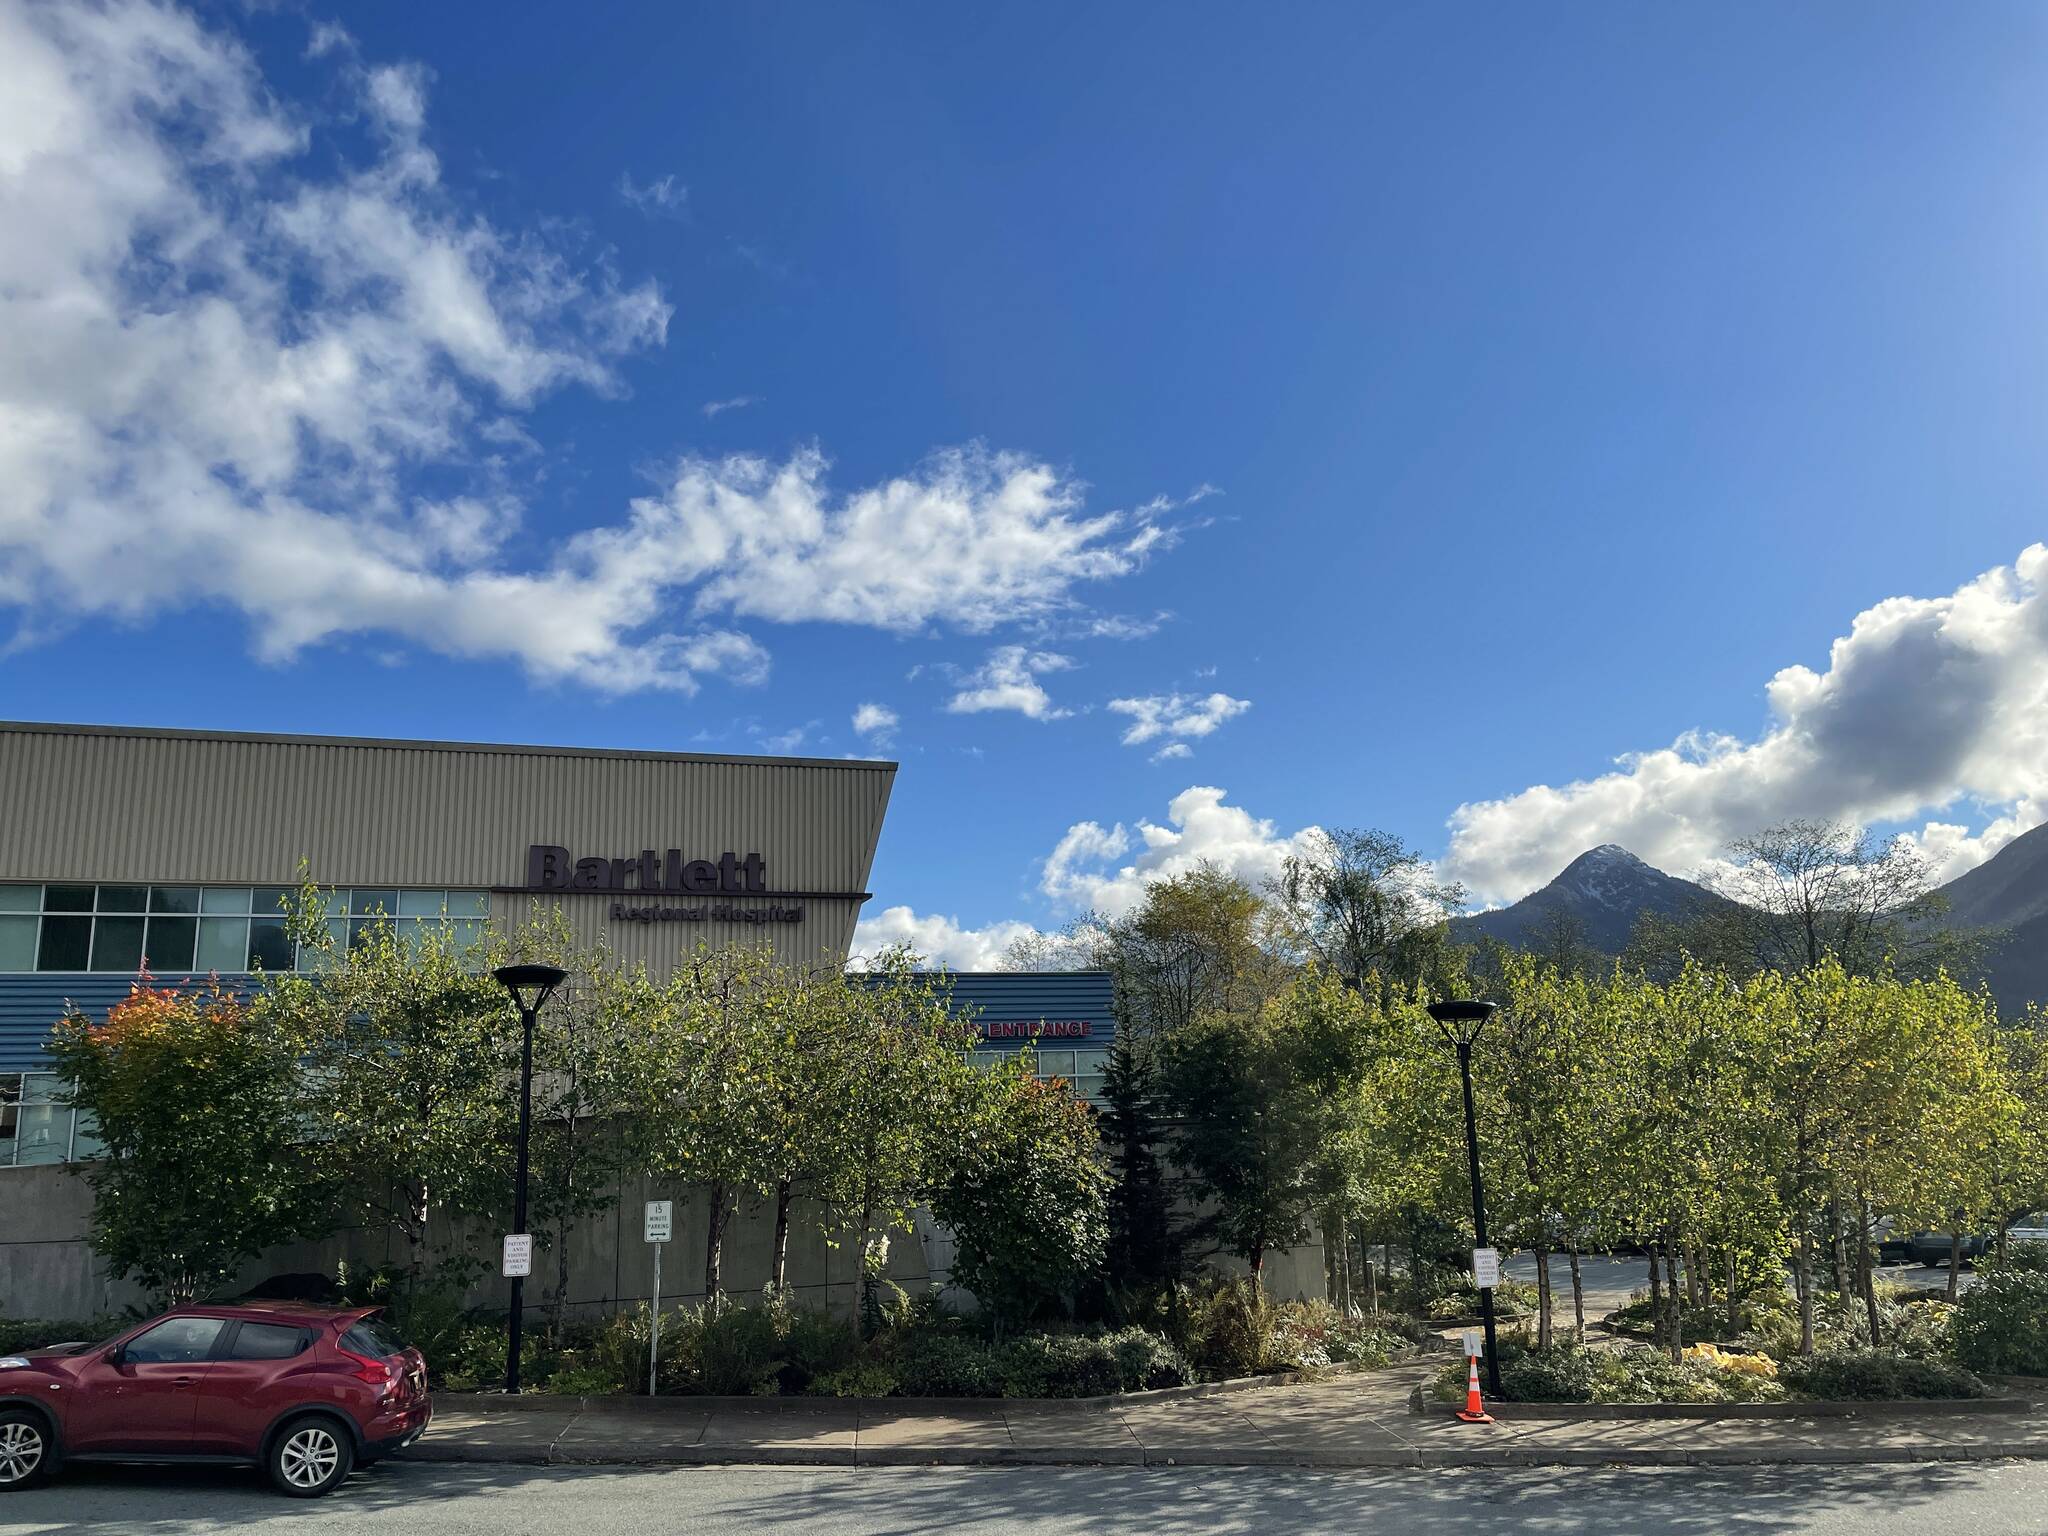 This photo shows Bartlett Regional Hospital on Oct. 4, 2021. As hospitals across the state move to crisis standards of care due to surging COVID-19 cases, local hospital officials say that Bartlett Regional Hospital is not at a crisis point. (Michael S. Lockett/Juneau Empire)